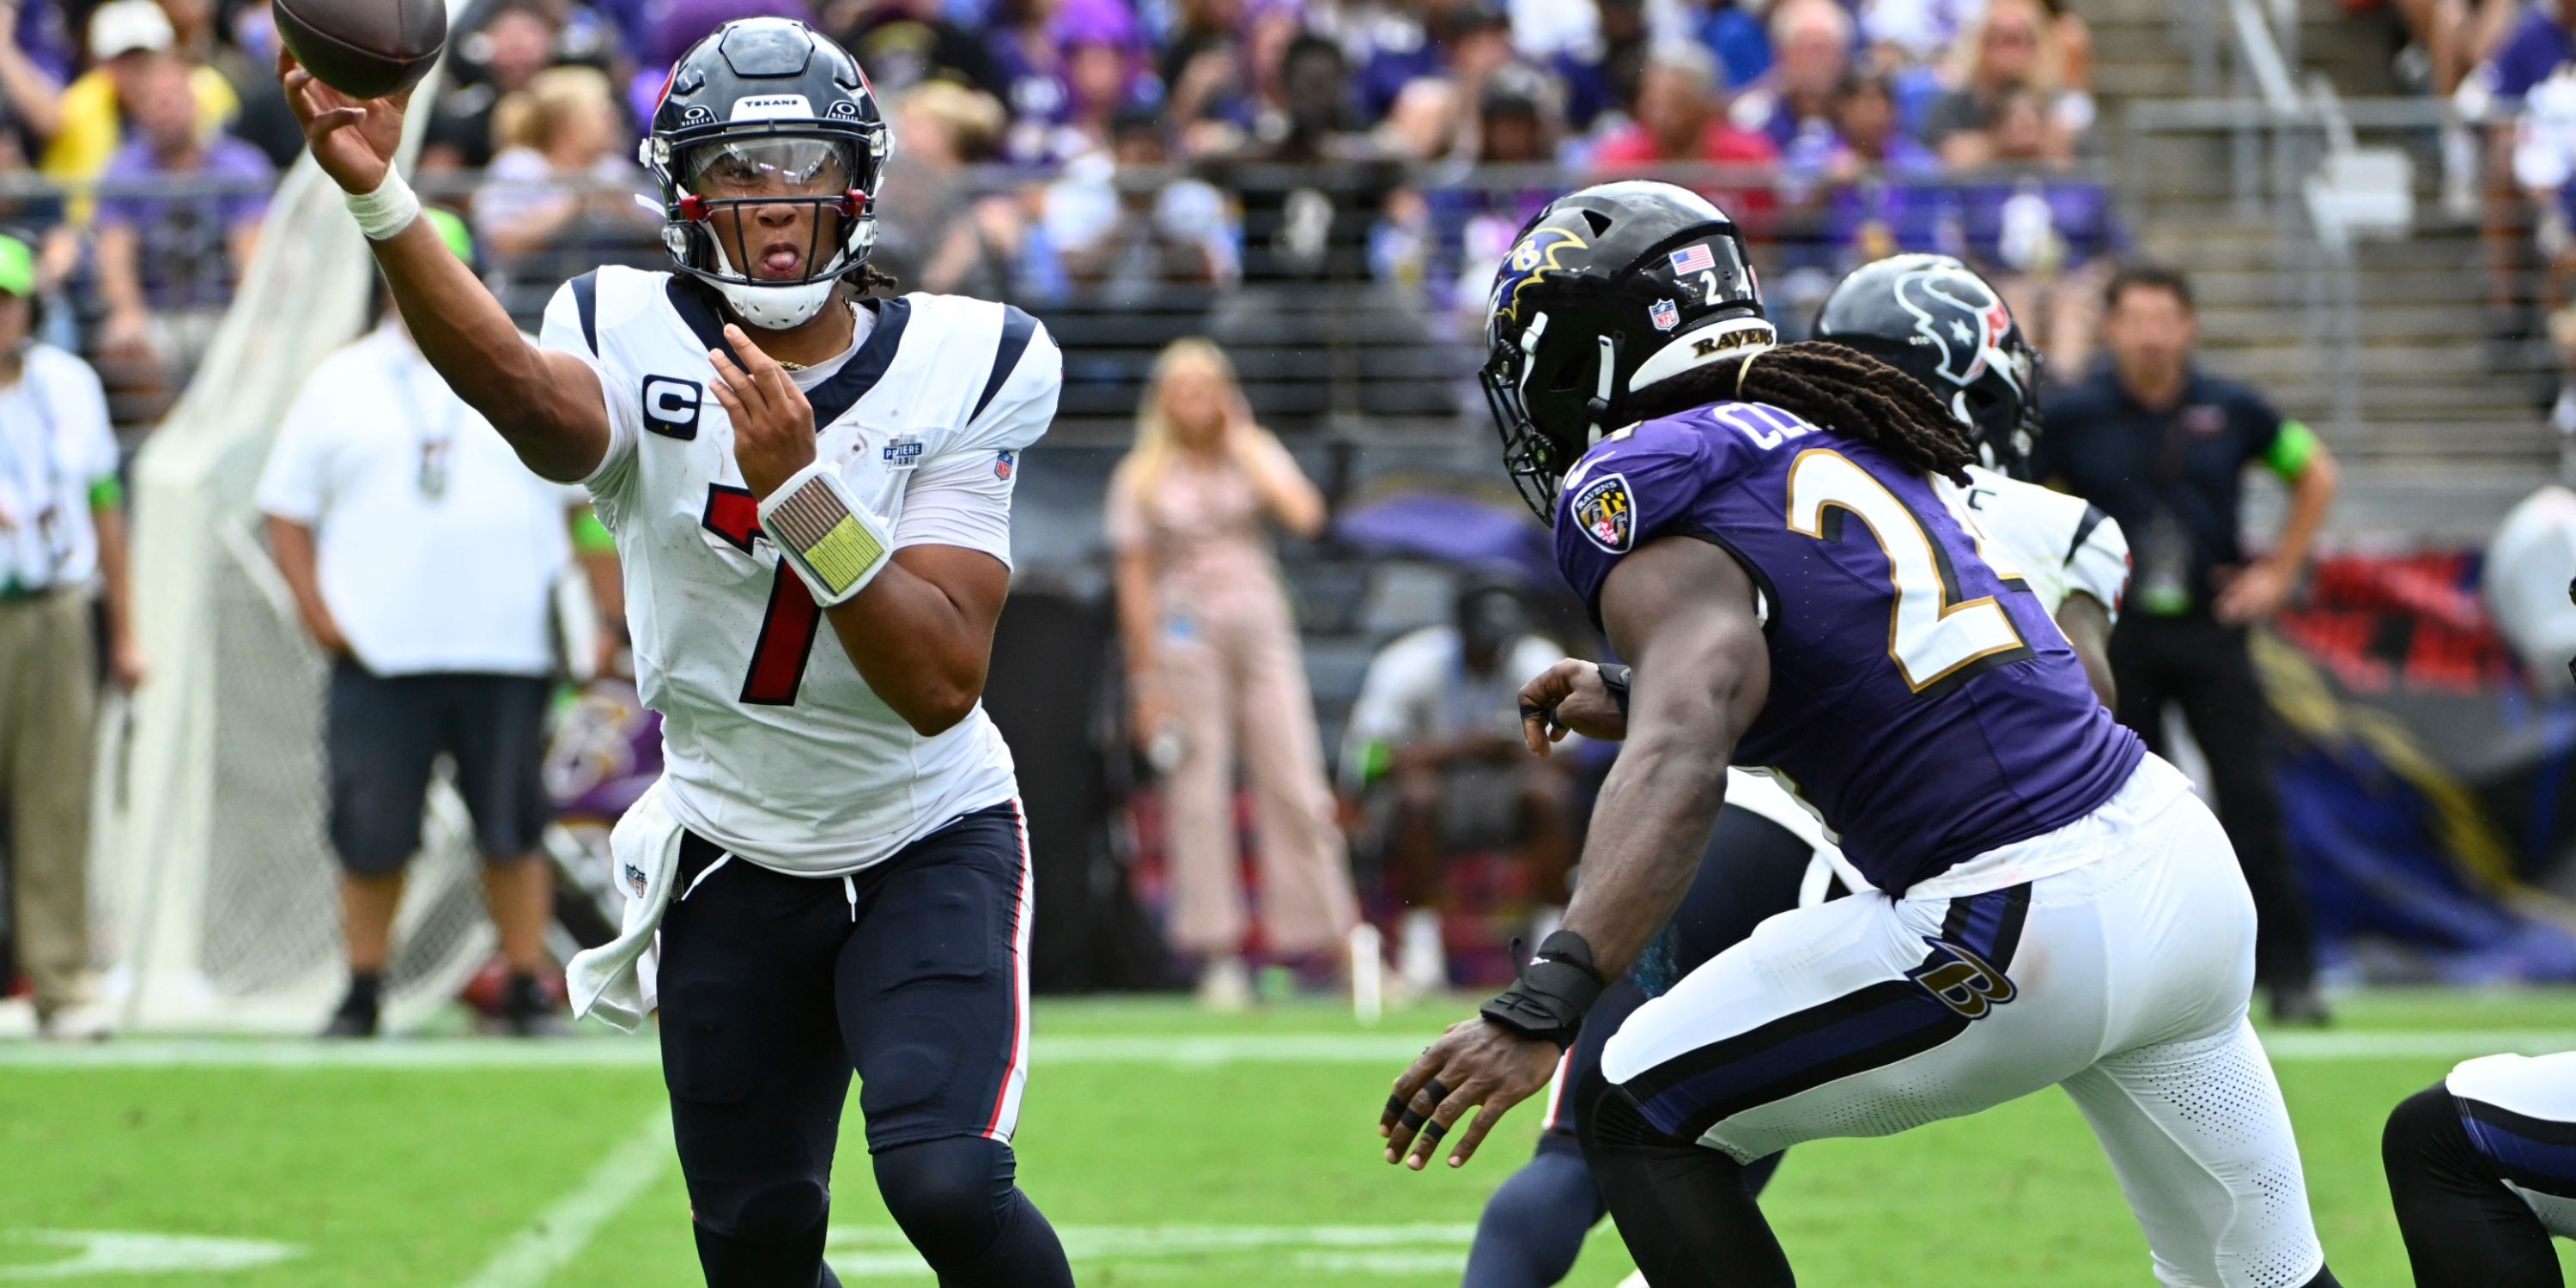 Ravens Vs Texans Playoff Preview Key Matchups Odds Injuries How To Watch 2337